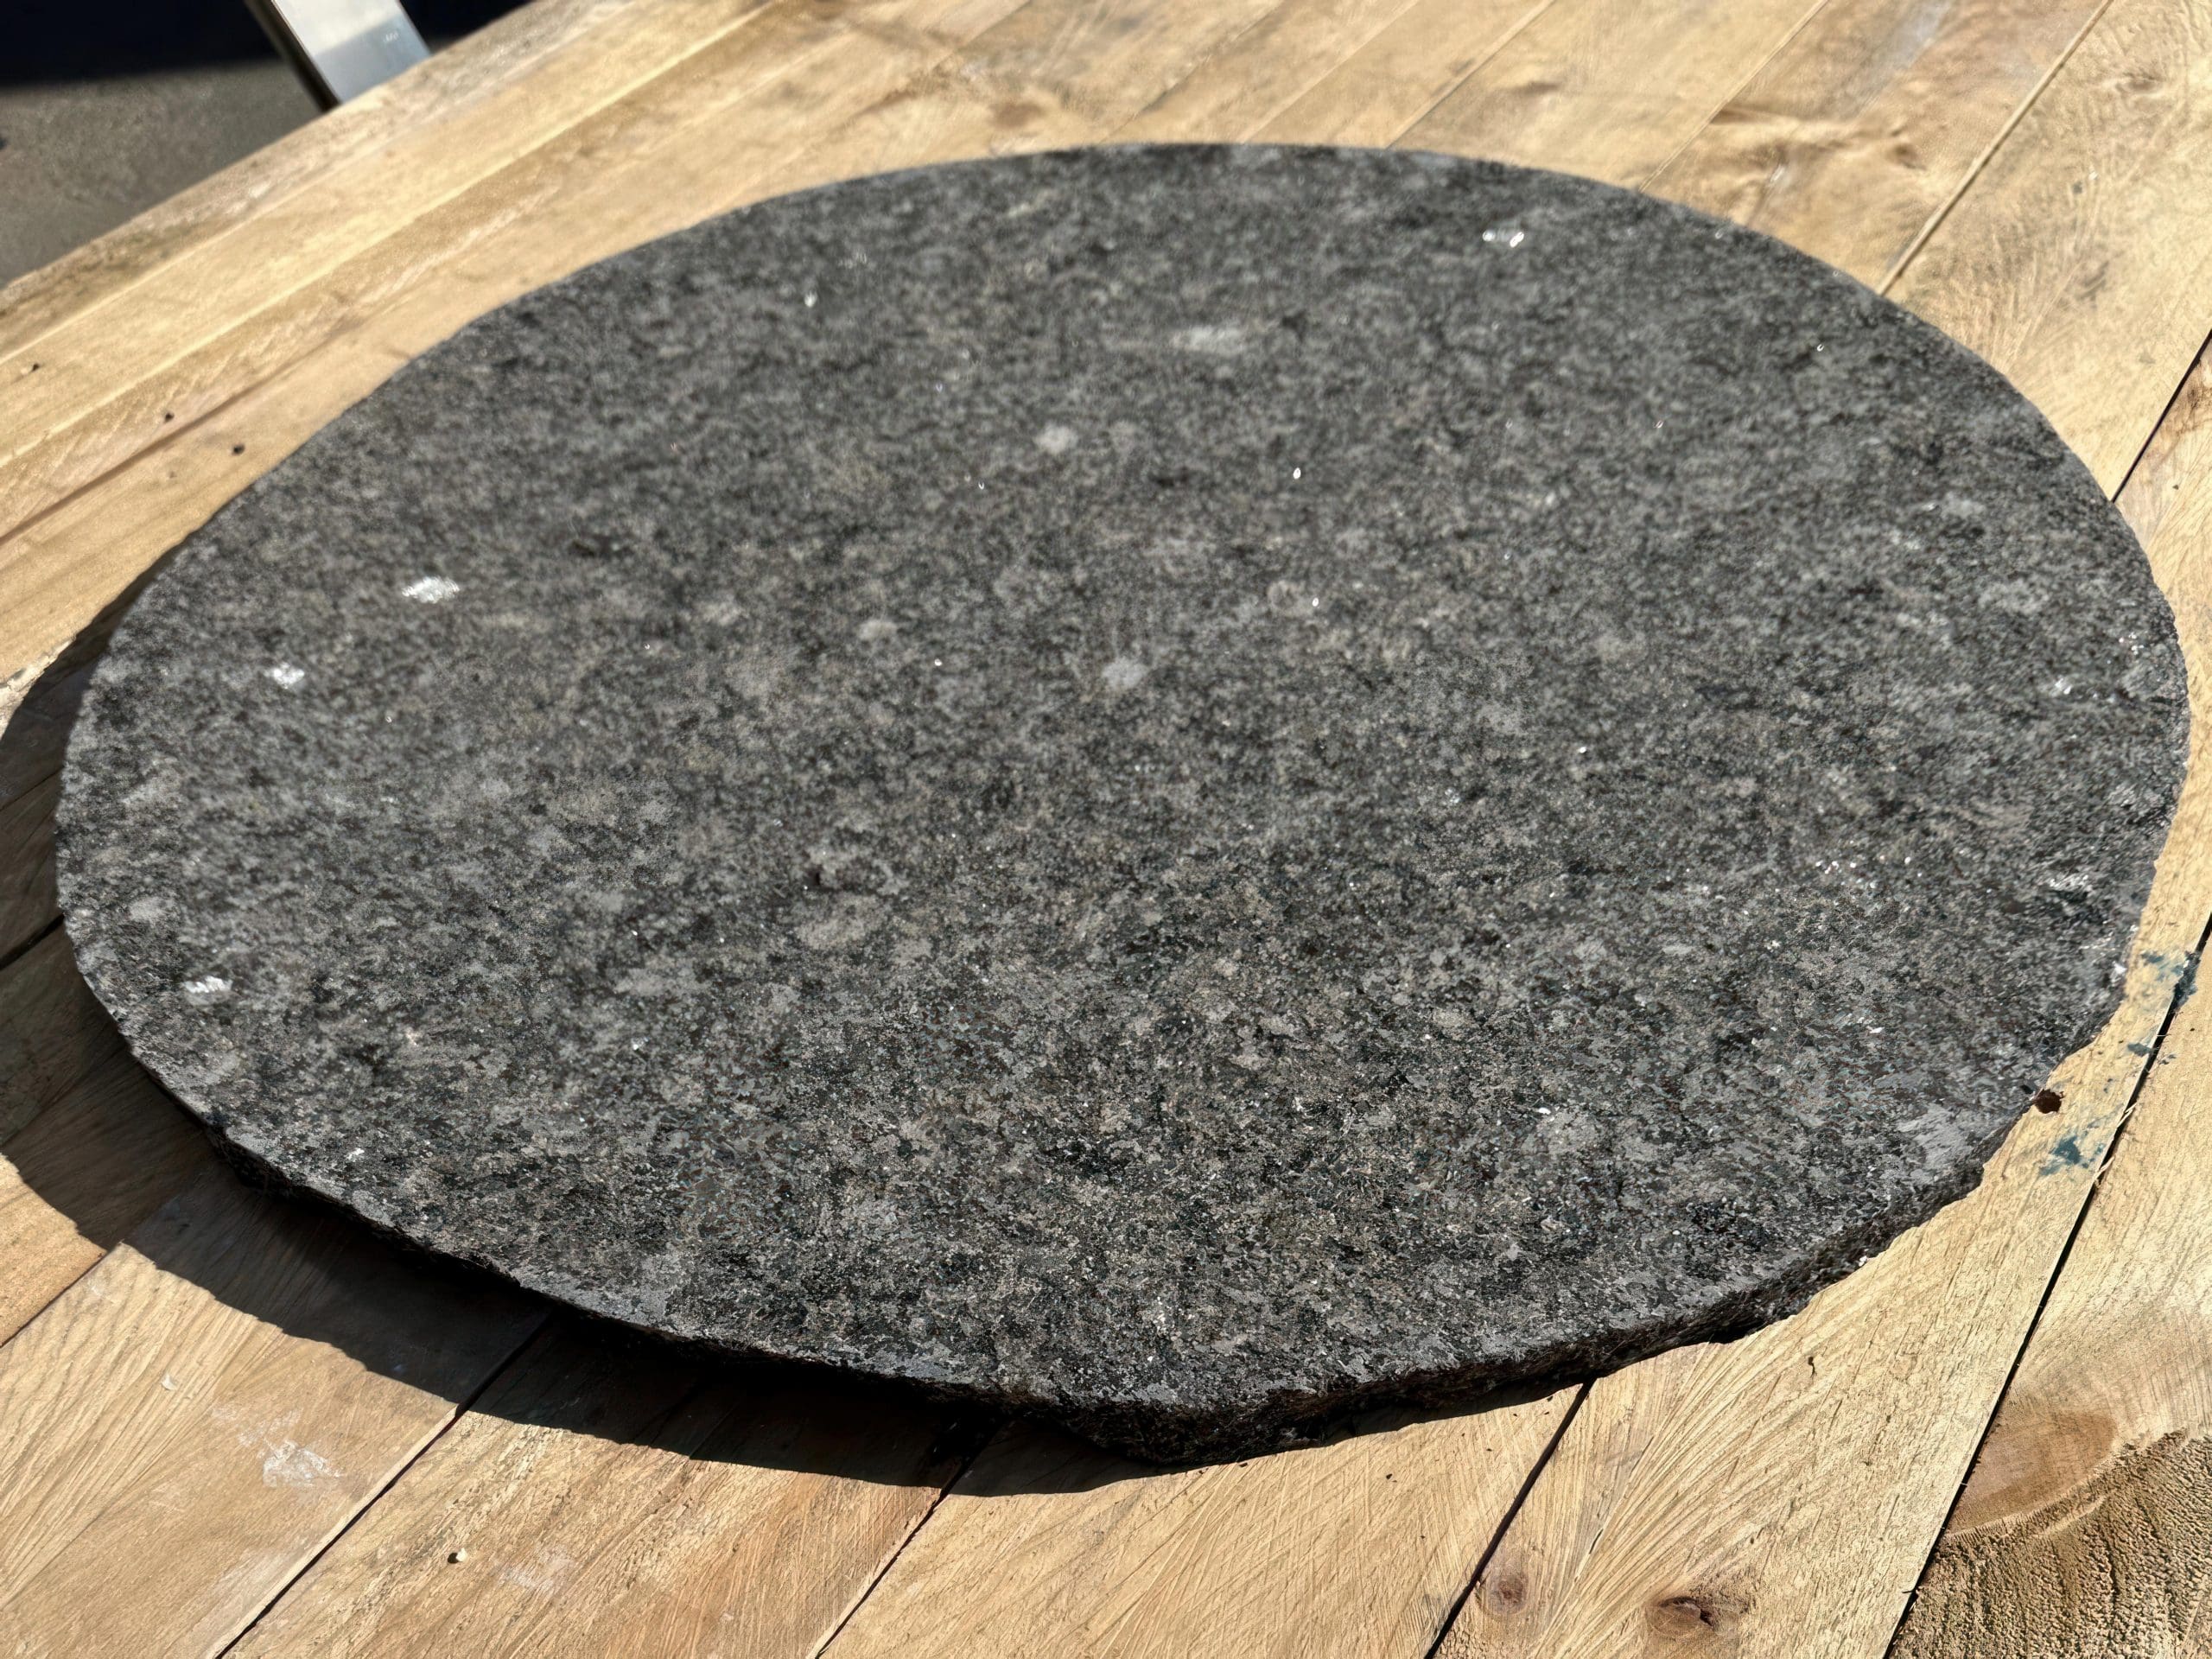 IMPALA BLACK GRANITE STEPPING STONES_RMS TRADERS_NATURAL STONE SUPPLIER MELBOURNE (5))